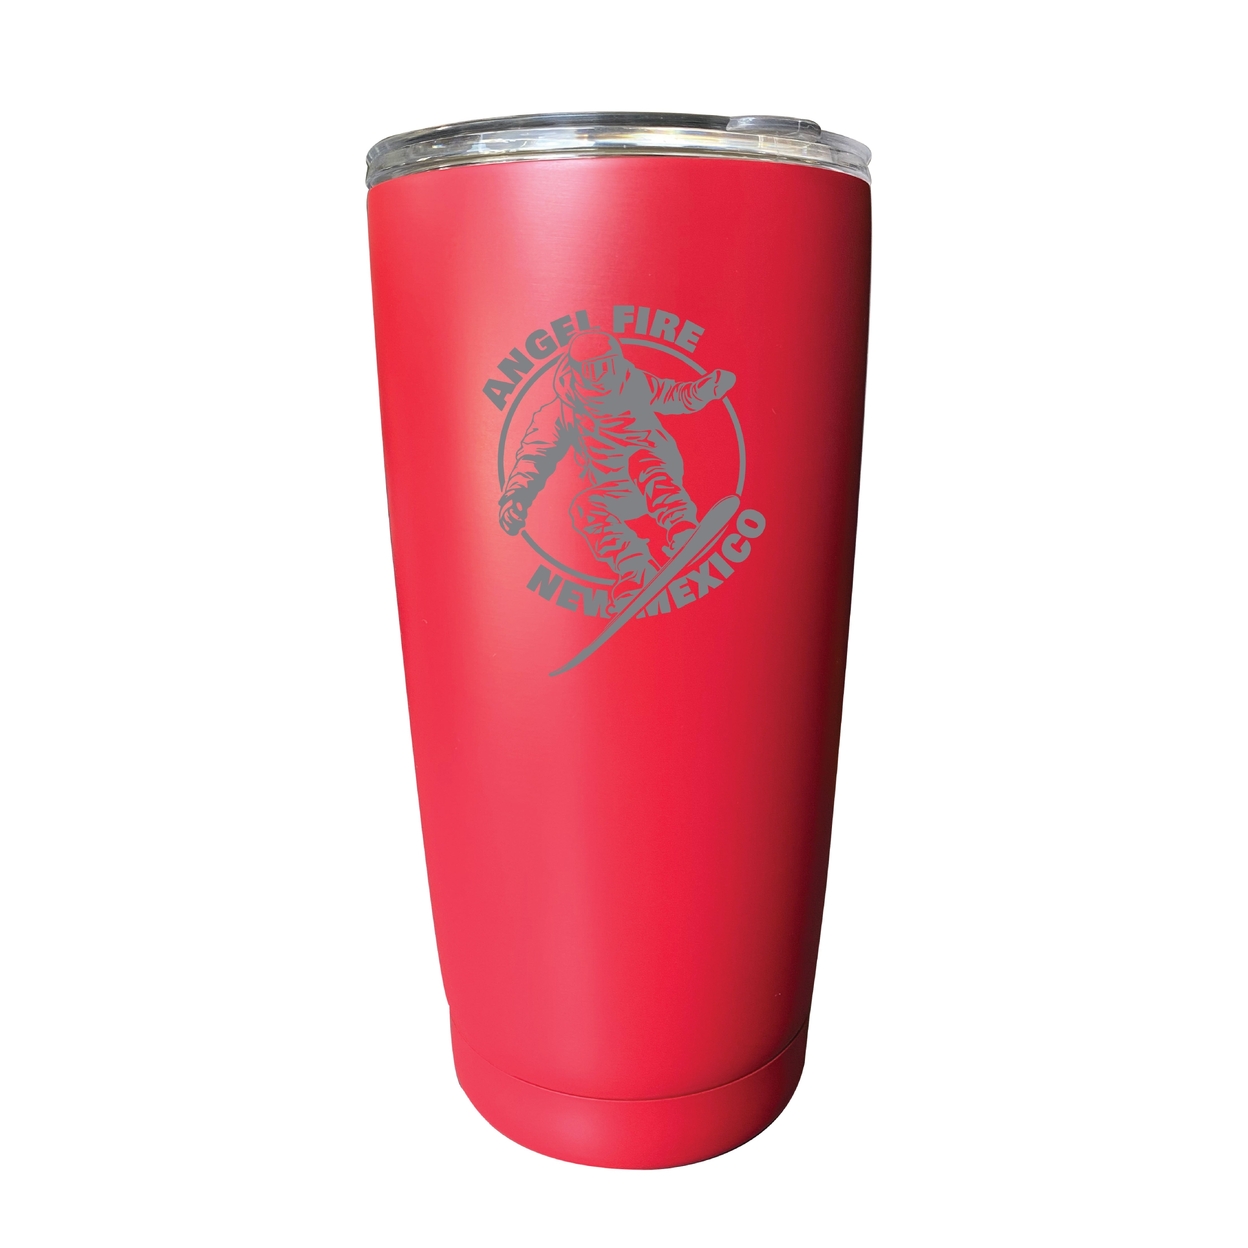 Angel Fire New Mexico Souvenir 16 Oz Engraved Stainless Steel Insulated Tumbler - Pink,,2-Pack